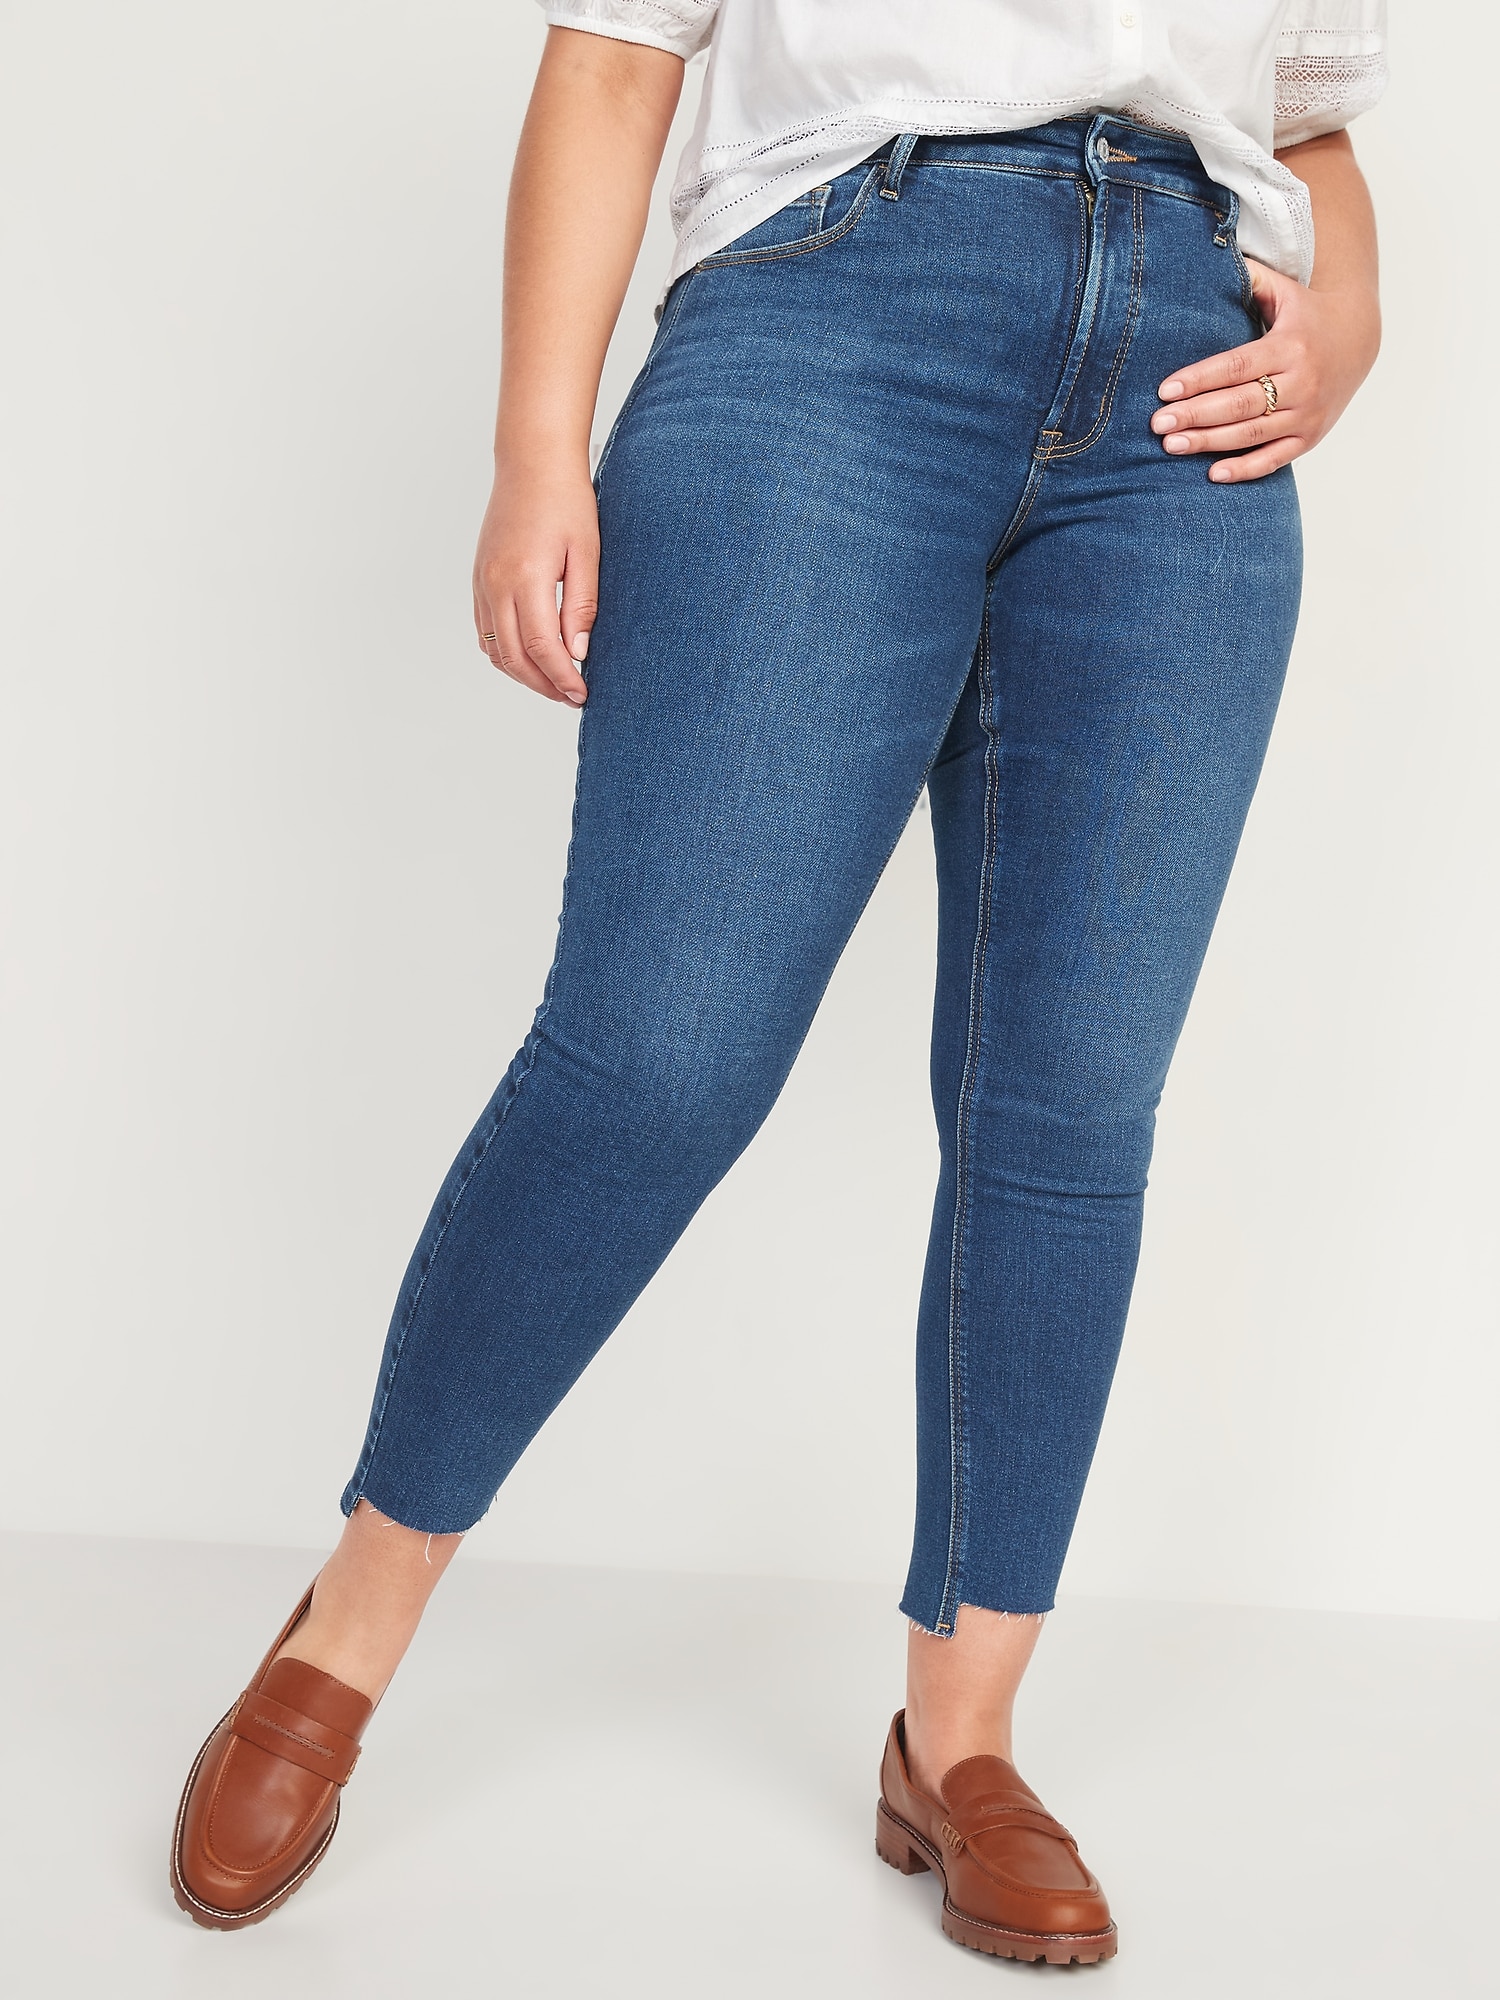 High-Waisted Rockstar Super-Skinny Cut-Off Ankle Jeans for Women | Old Navy